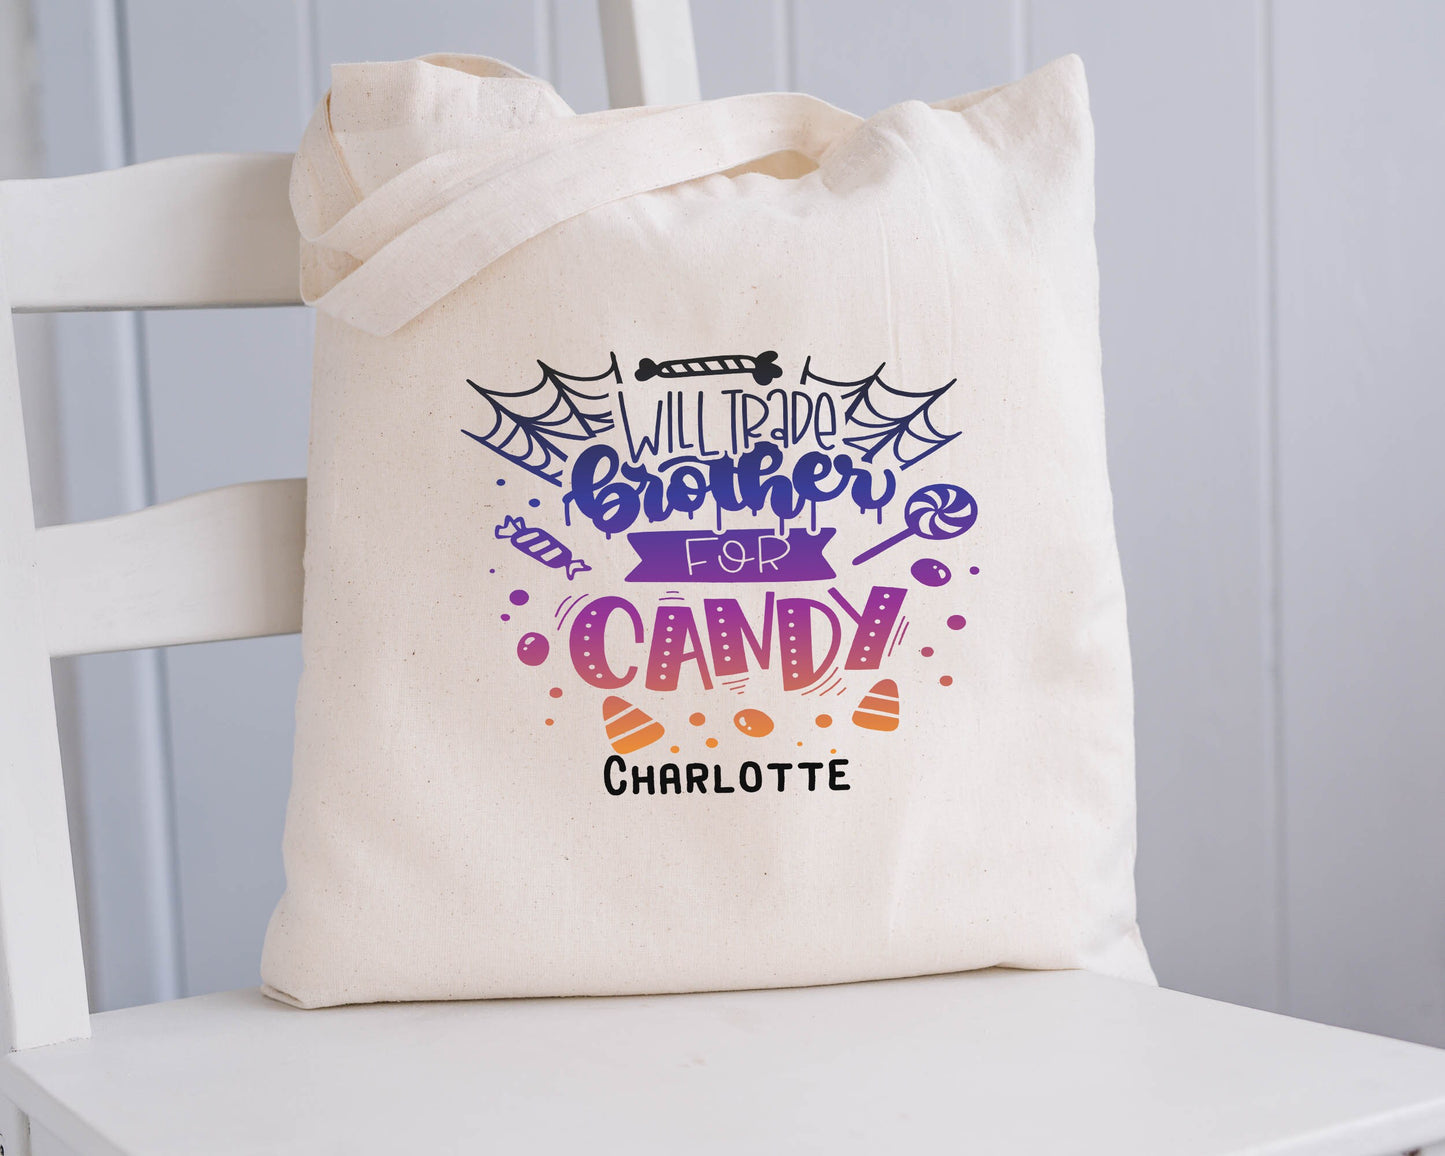 Trick or Treat Bags, Personalized Halloween Bag, Will Trade Brother For Candy Bag, Halloween Treat Bags for Kids, Halloween Gift For Girls